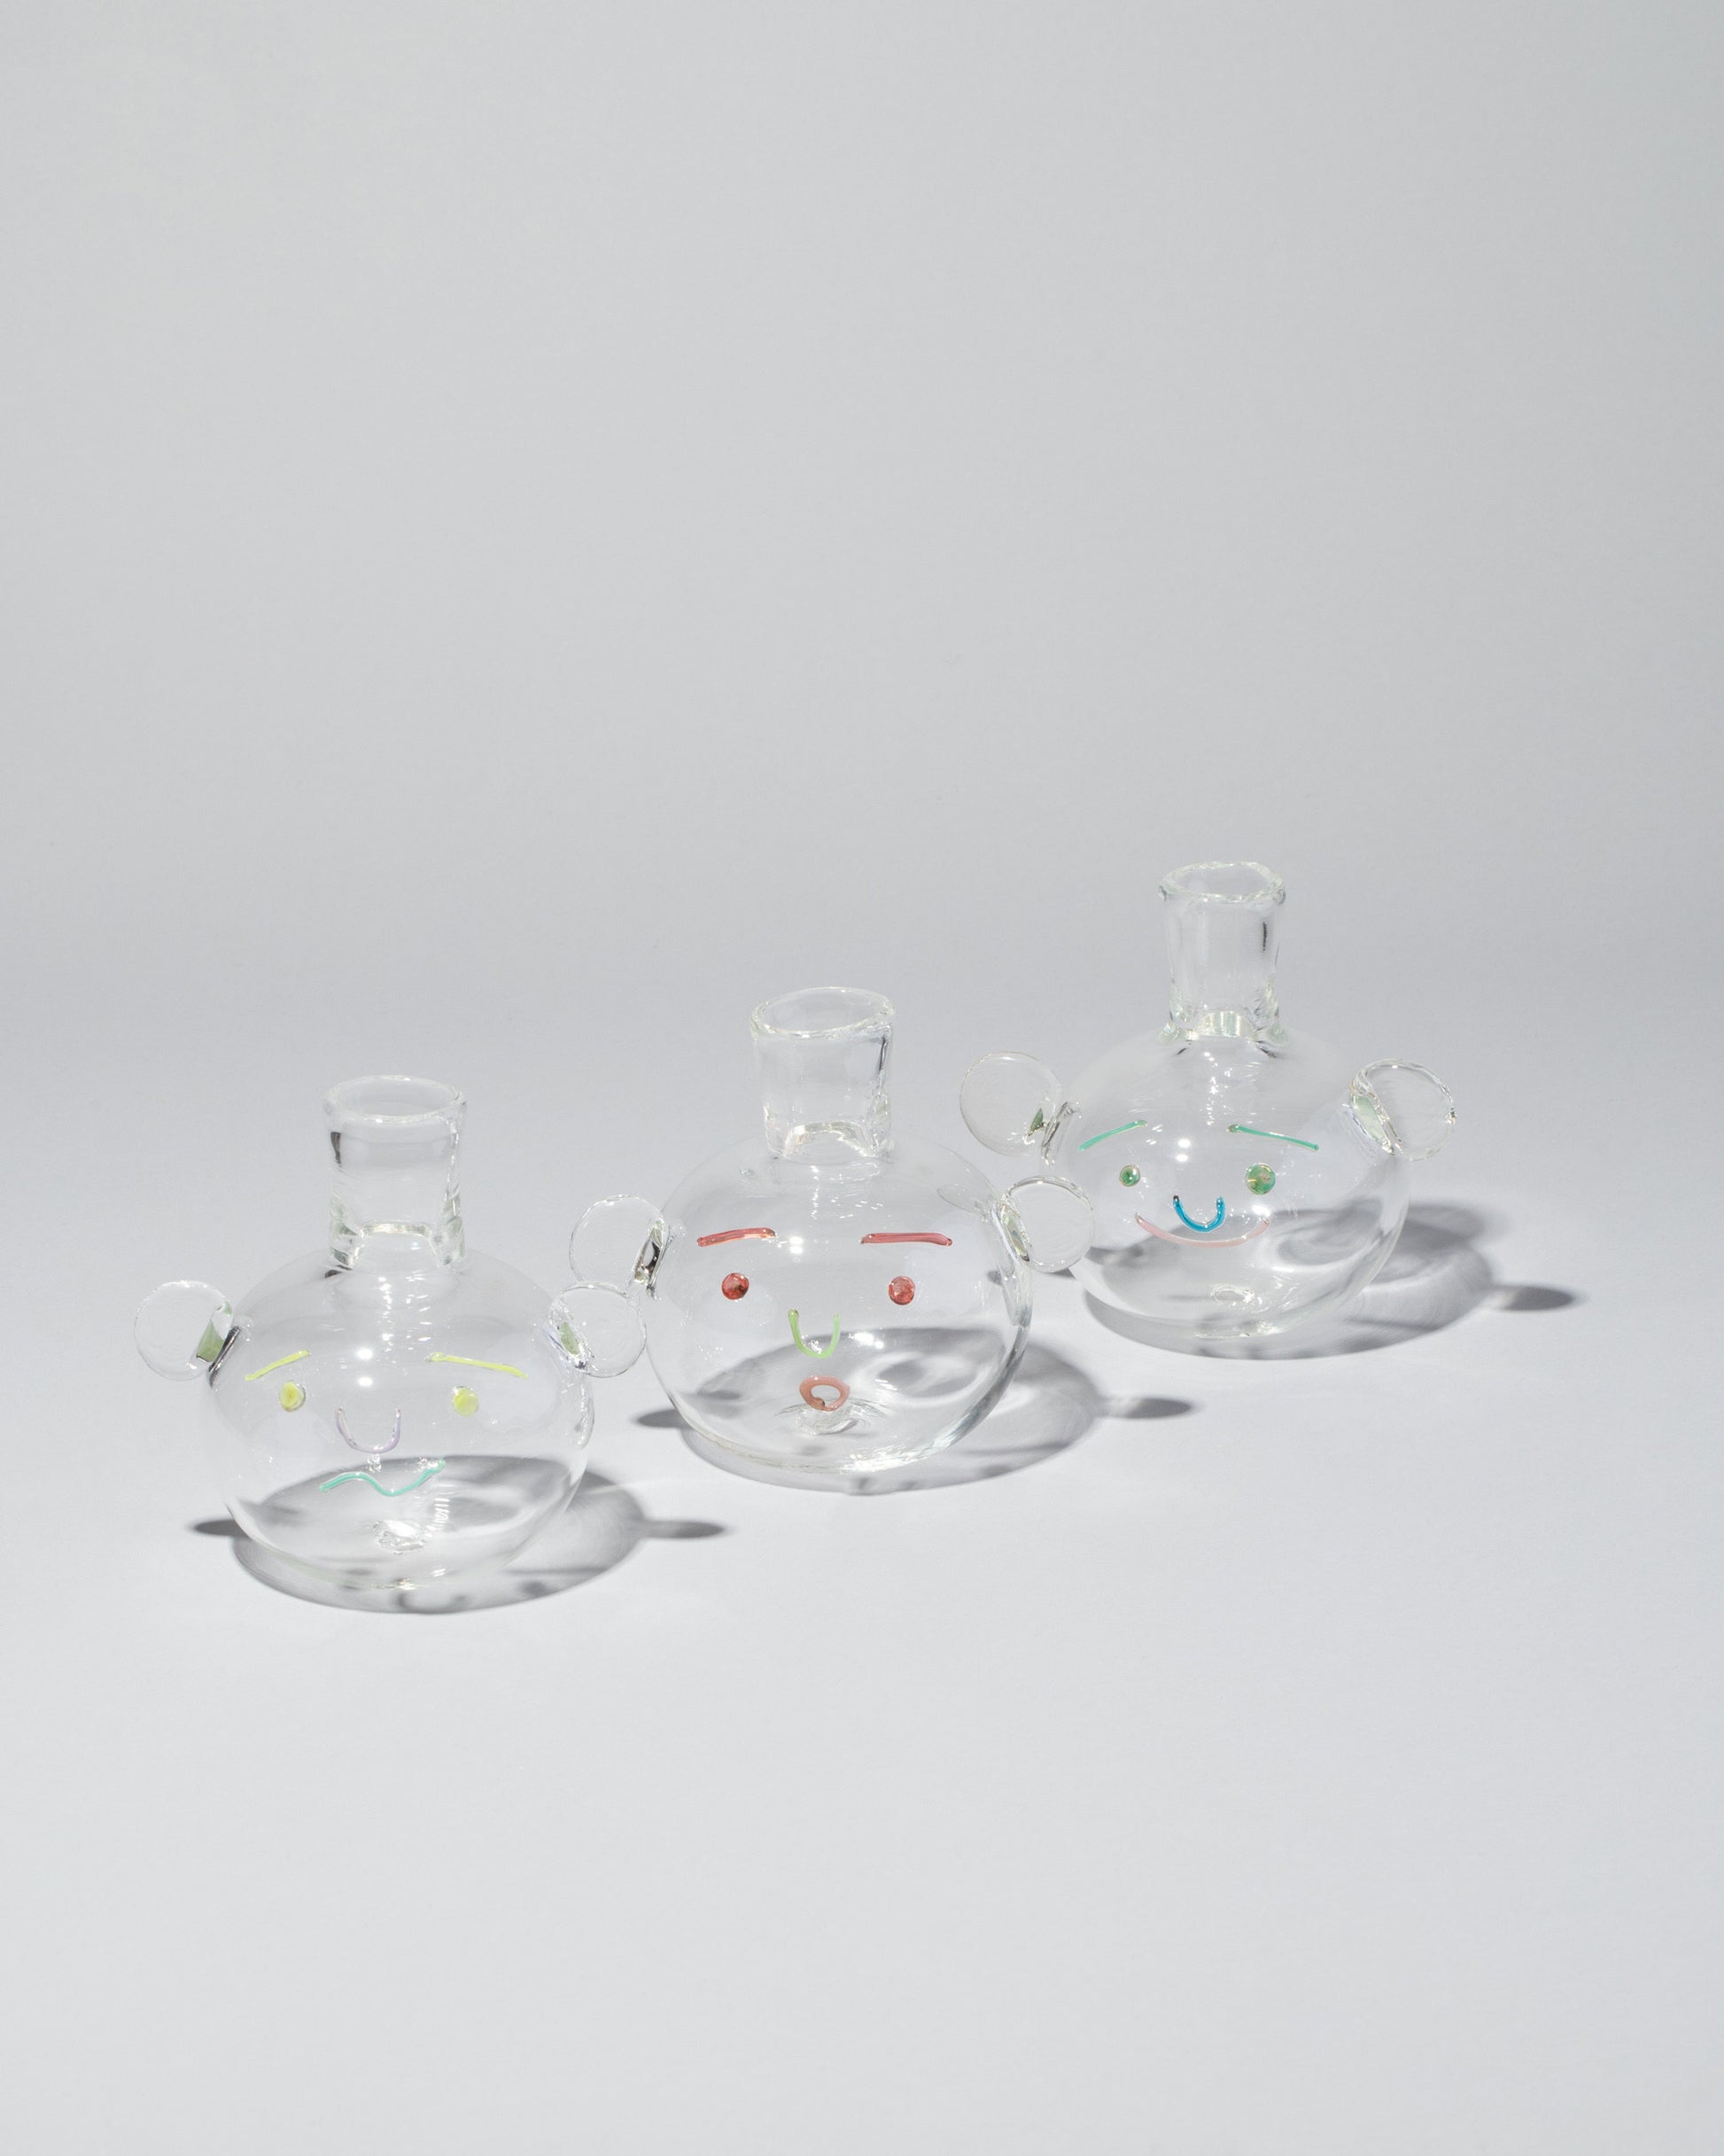 Group of TAK TAK Goods Salty, Surprised and Smiley Bubble Vases on light color background.